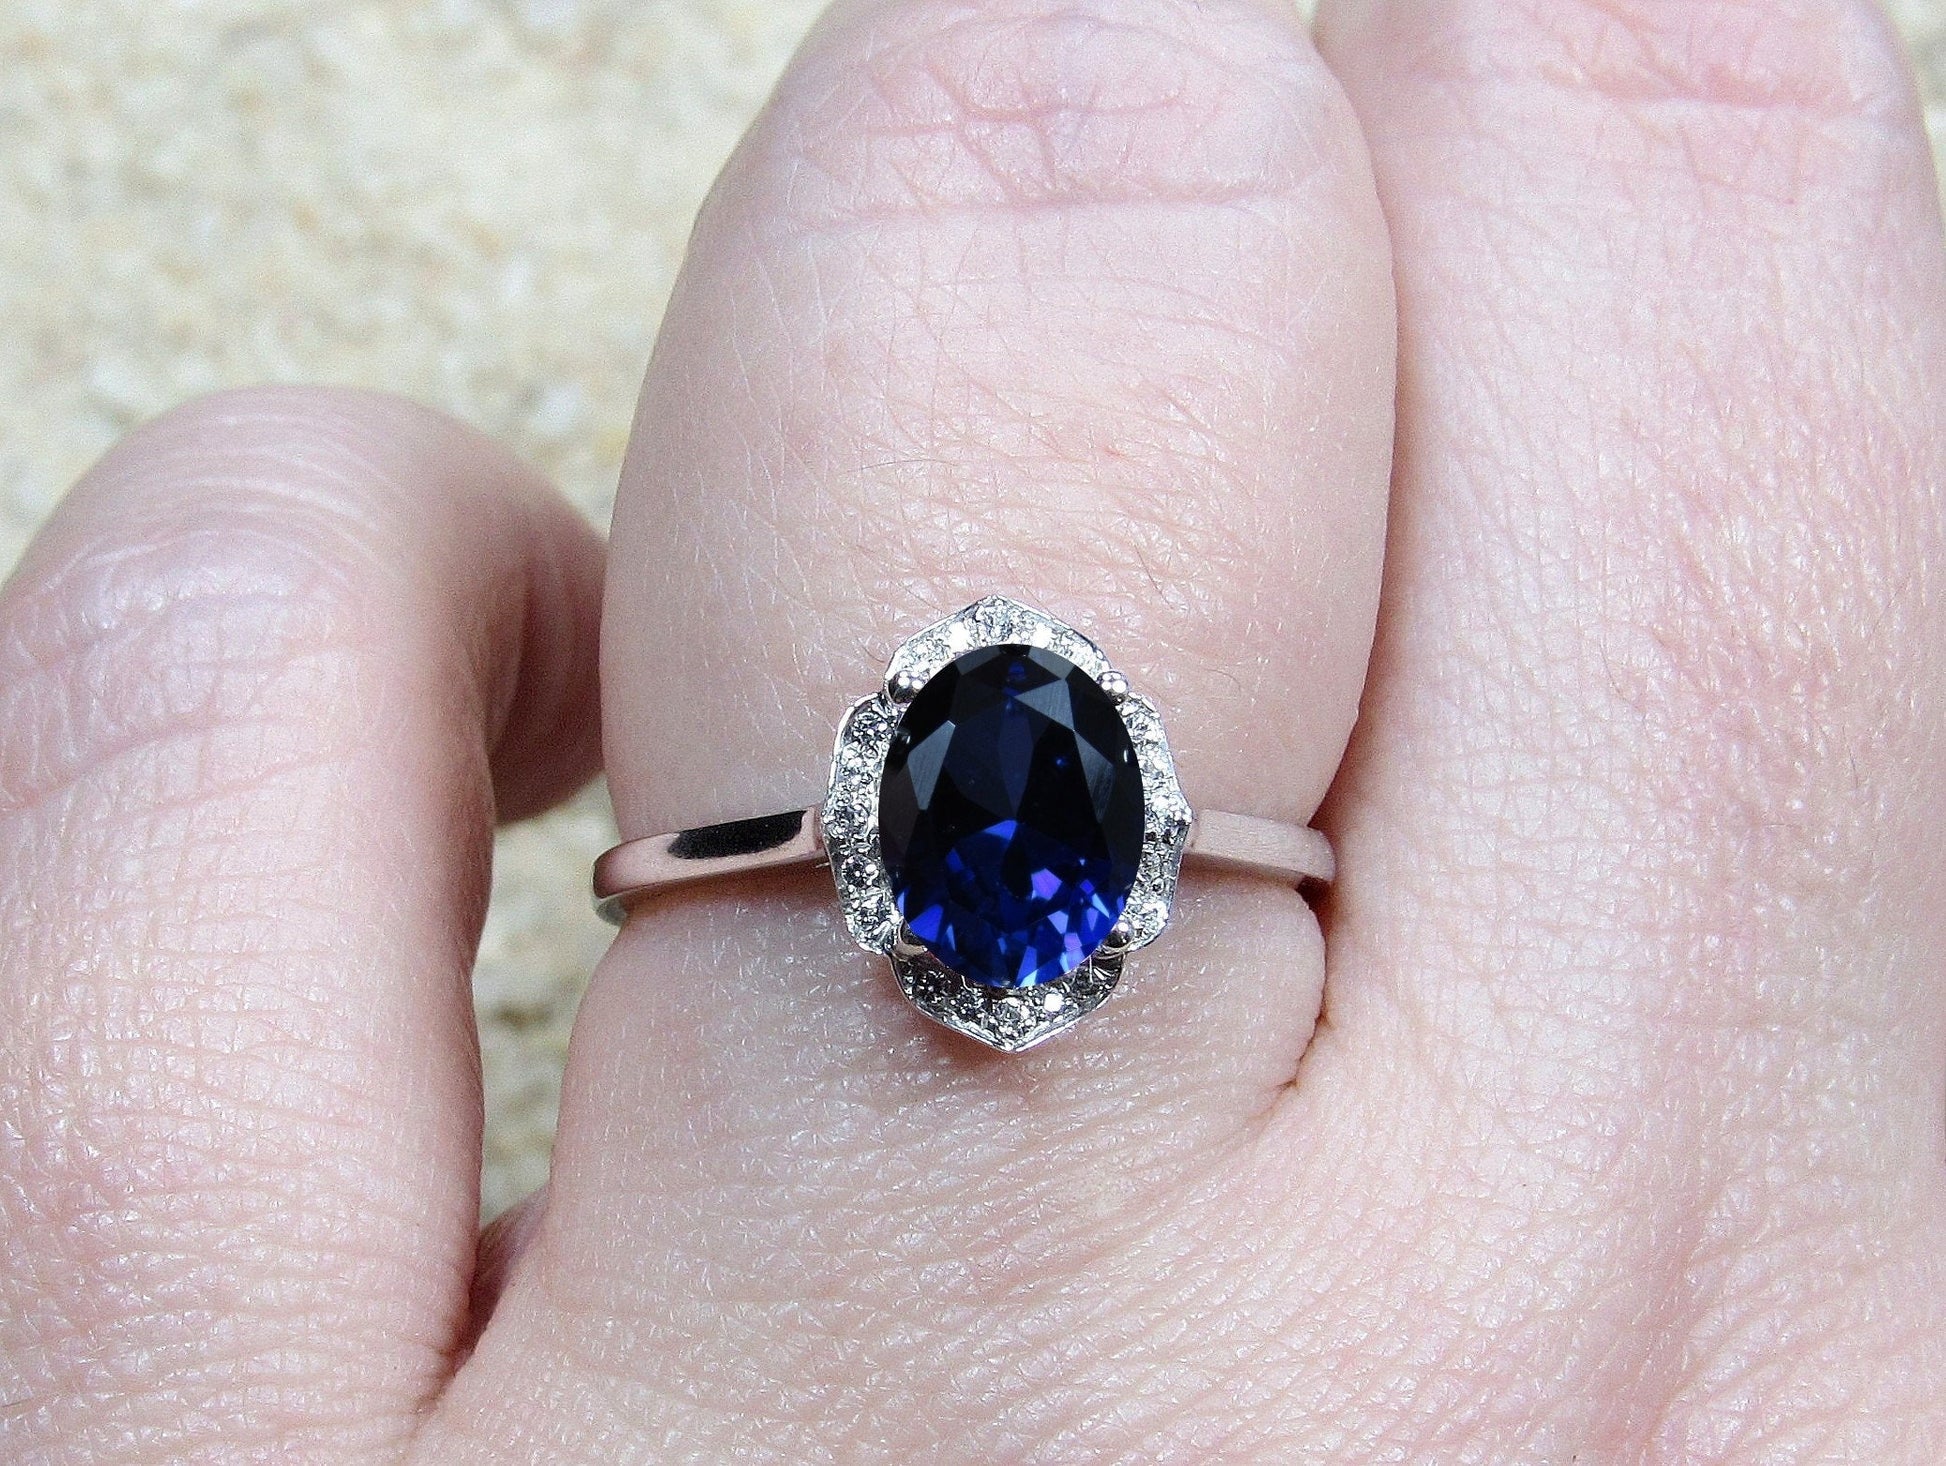 Blue Sapphire Oval Engagement Ring, Floral Ring, Sospita, 2ct Ring, White-Yellow-Rose Gold-10k-14k-18k-Platinum, 8x6mm Oval BellaMoreDesign.com